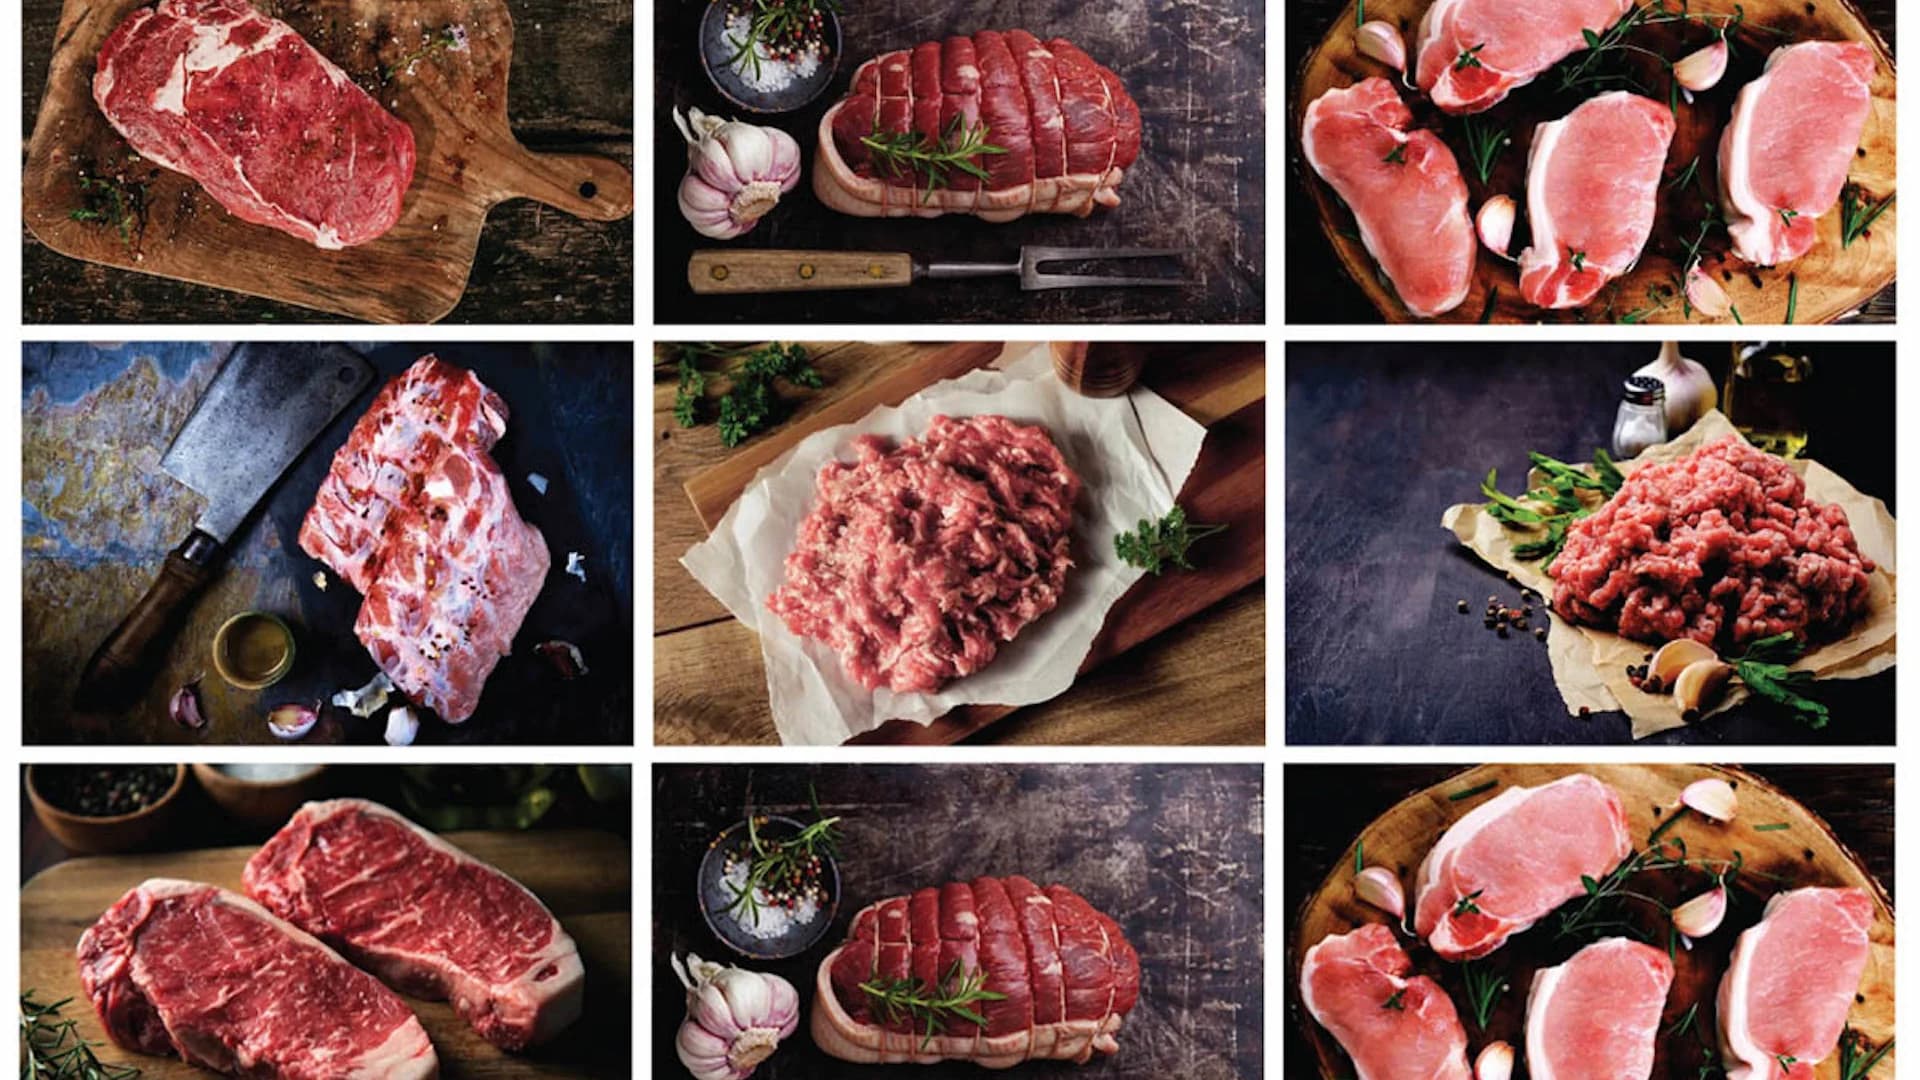 Get fresh farm-to-table meats delivered to your door for a discount